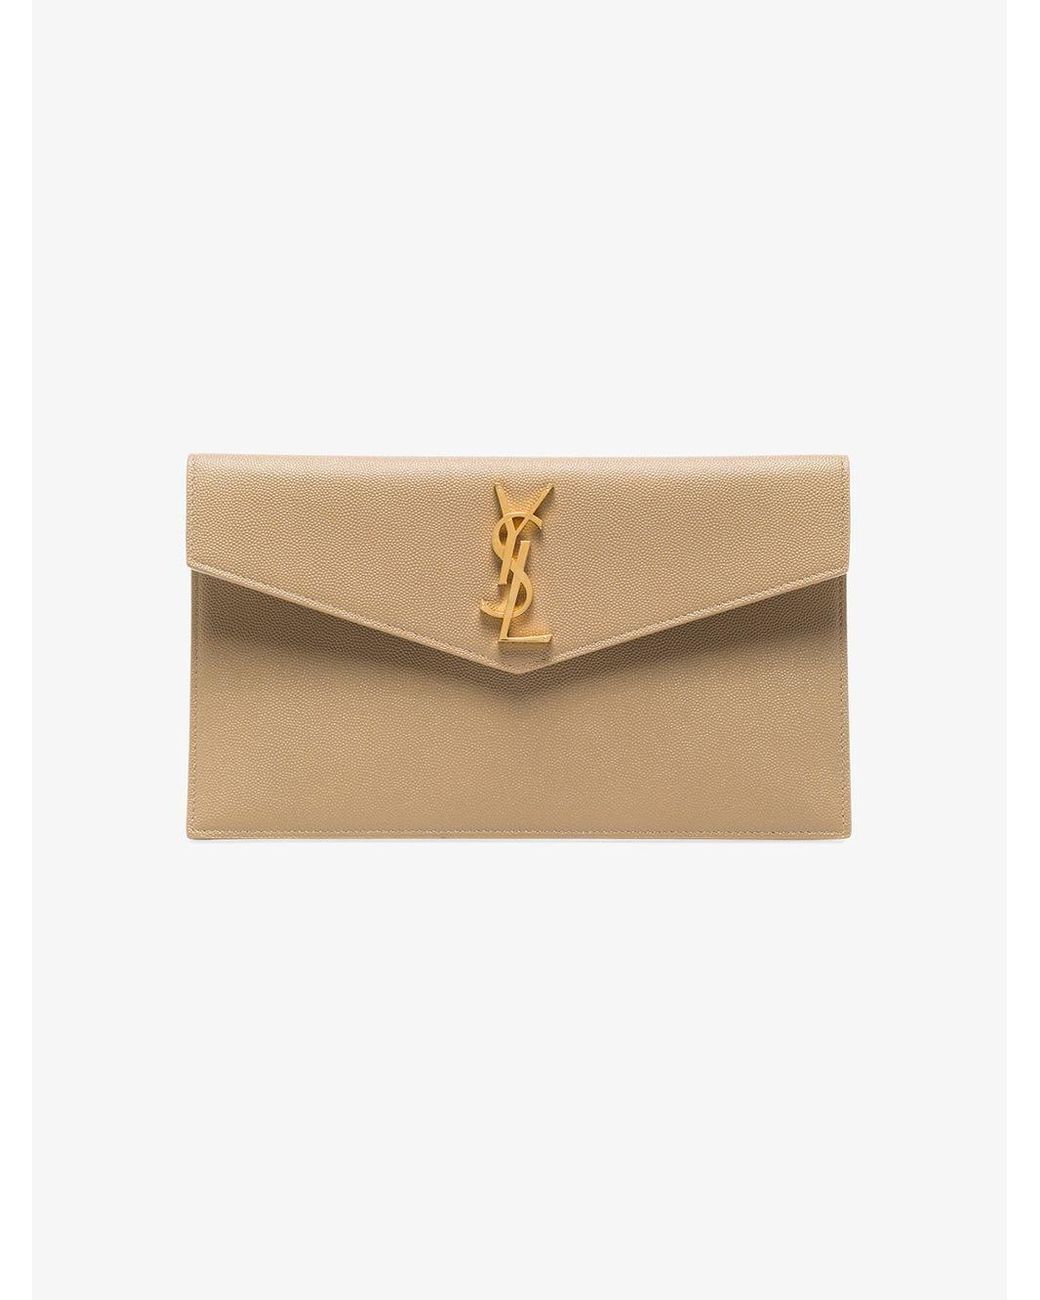 Saint laurent Pouch uptown available on SUGAR - 134433